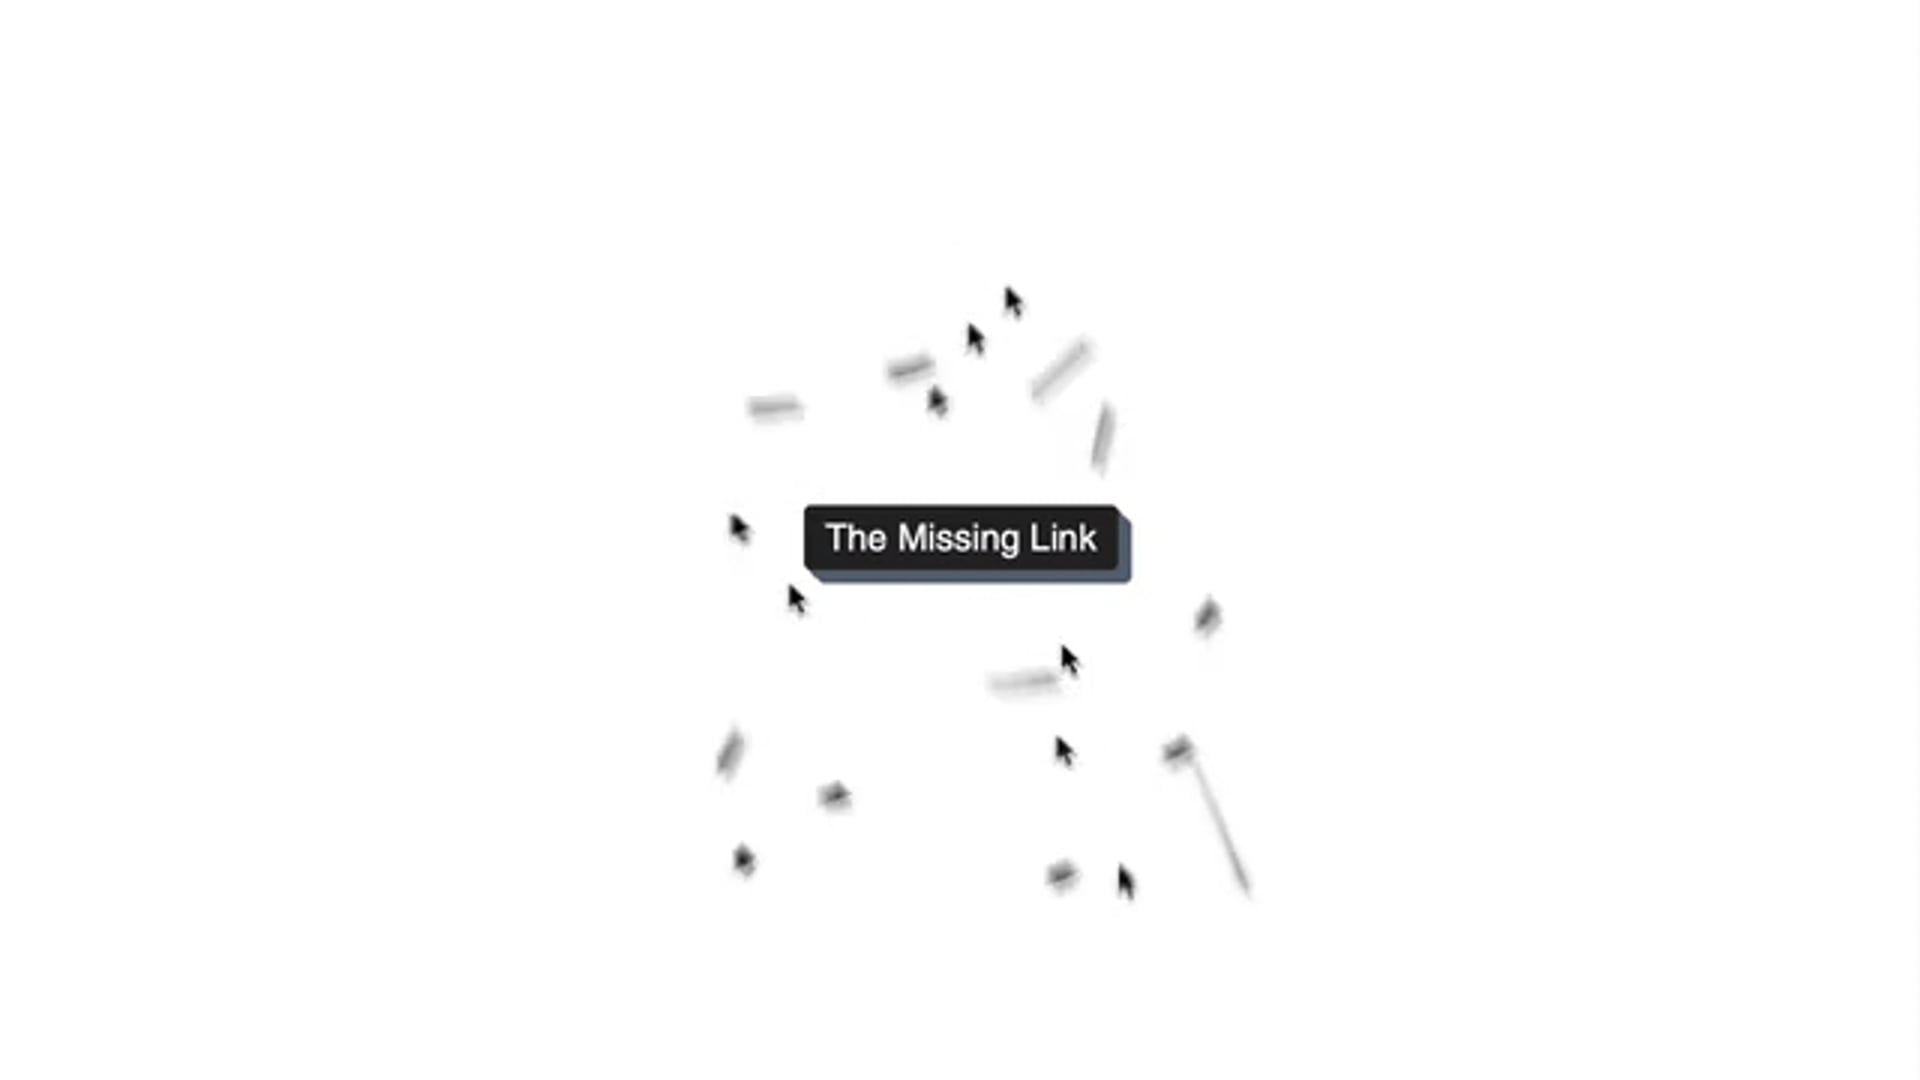 THE MISSING LINK PROJECT by SNEHA JOSHI